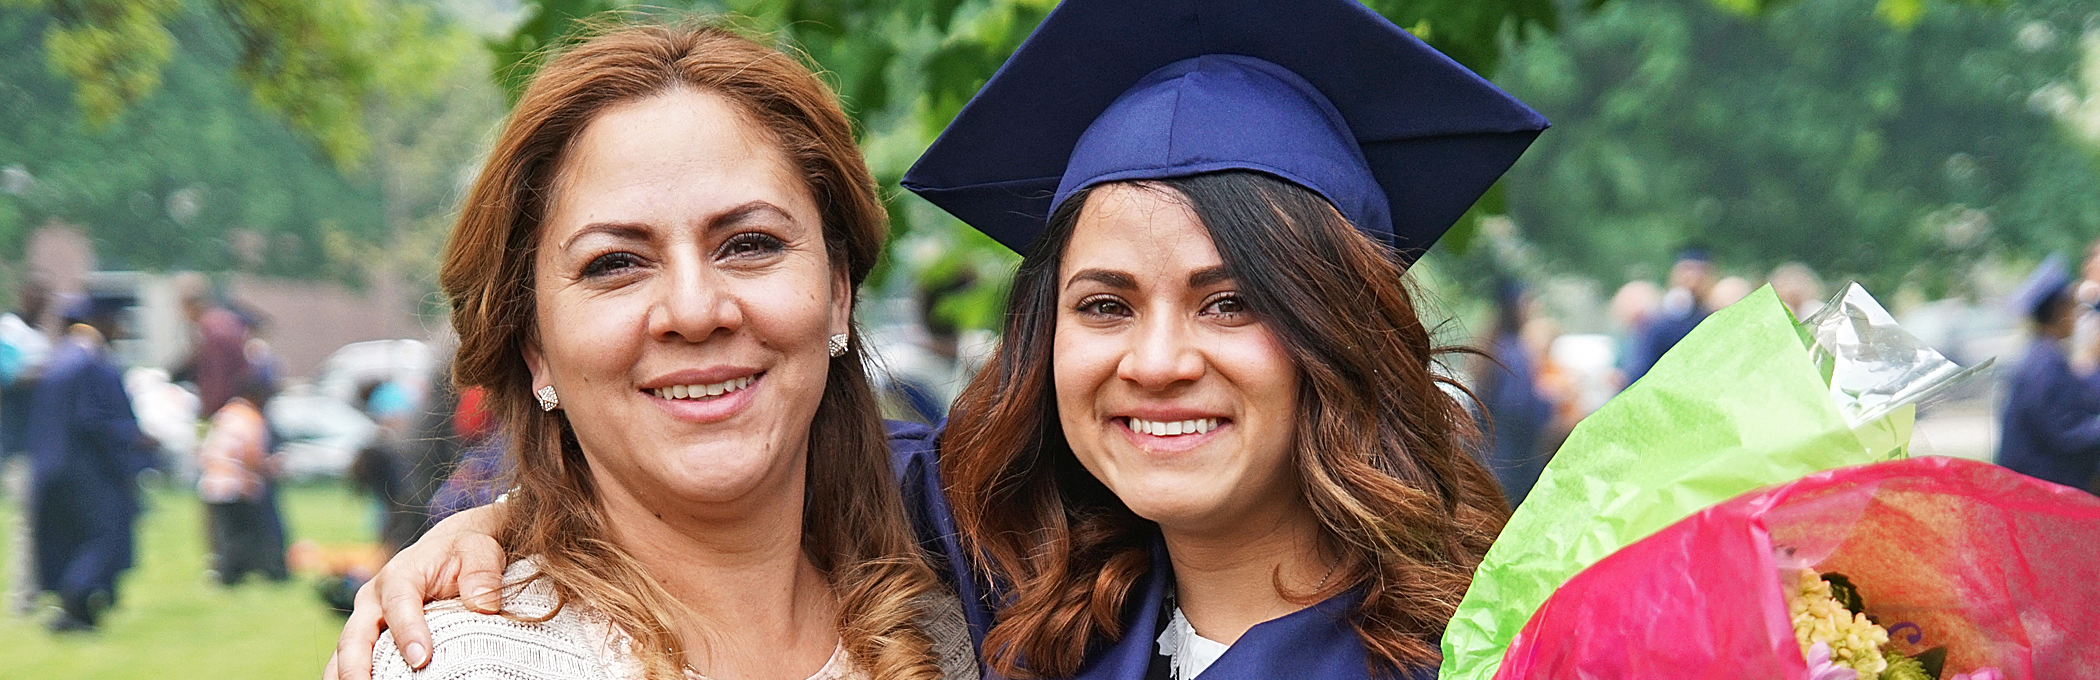 mother and daughter at graduation